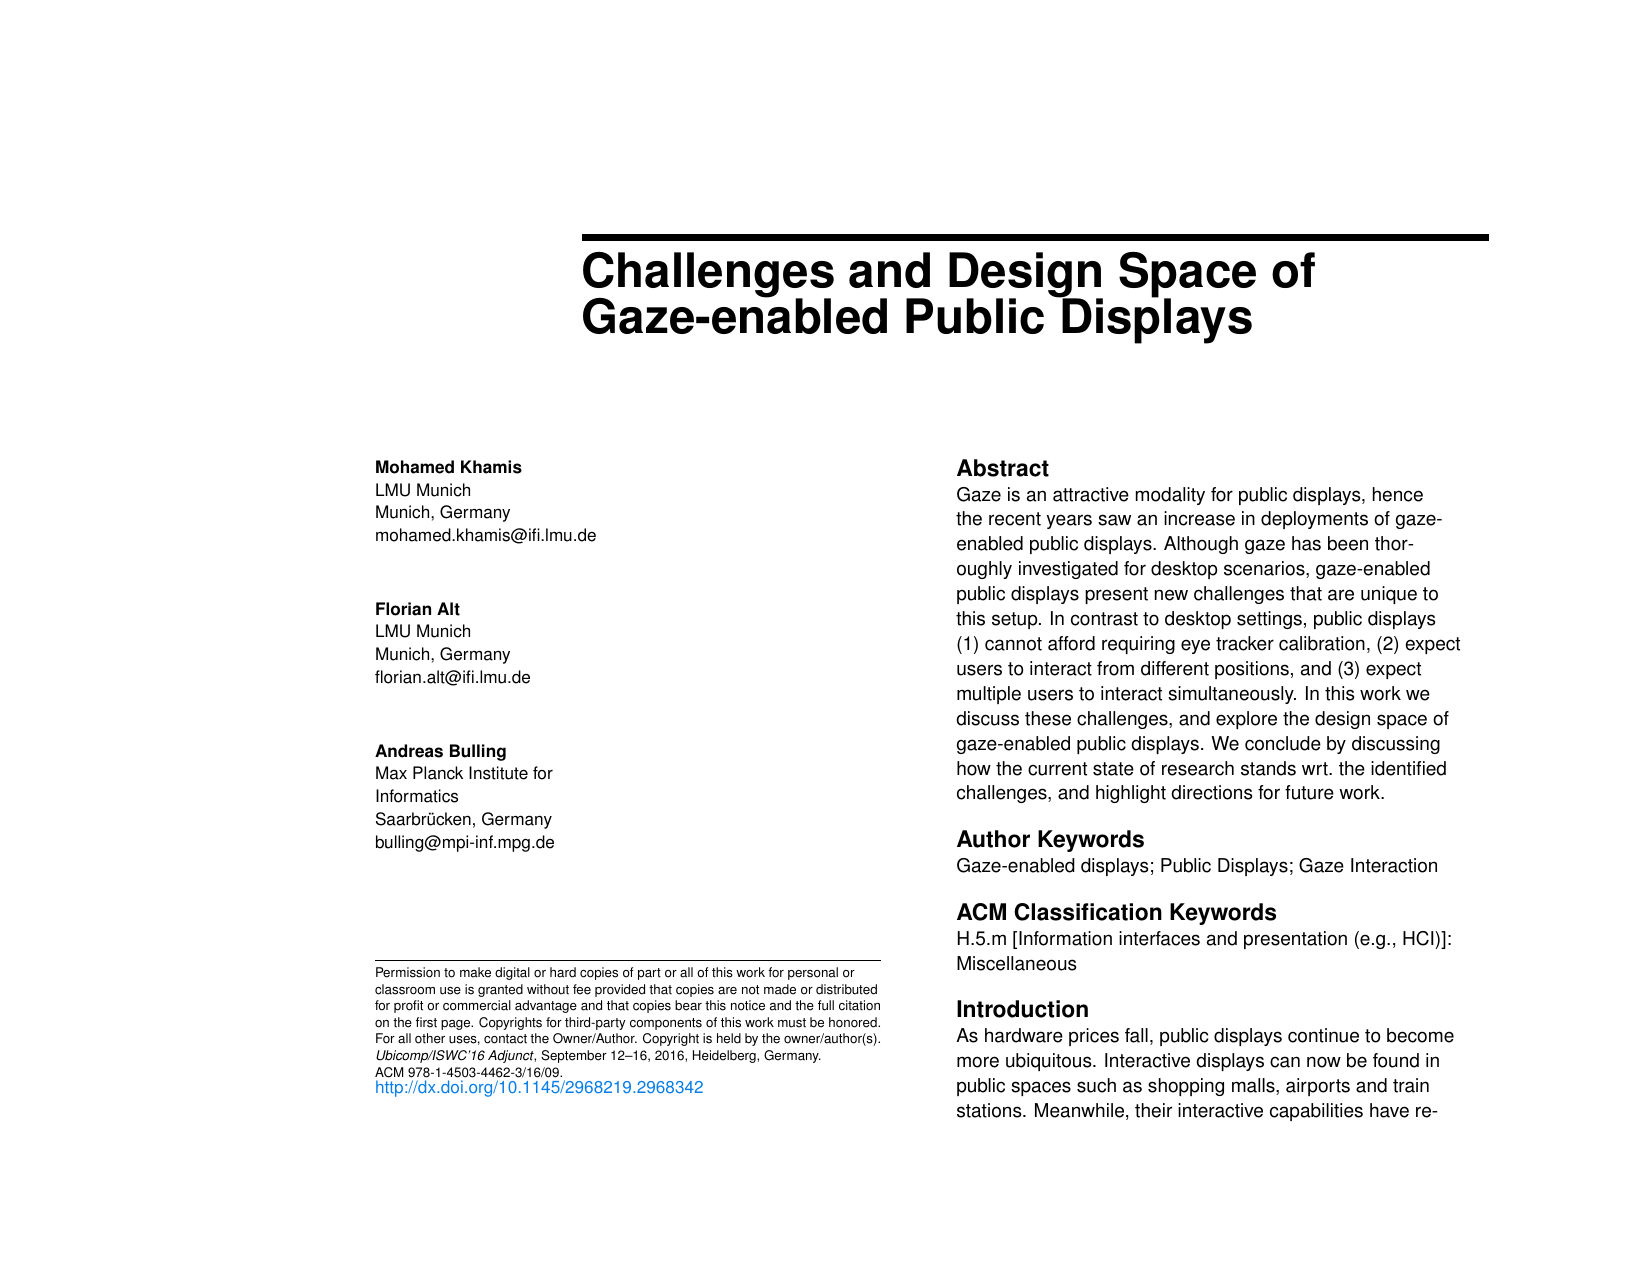 Challenges and Design Space of Gaze-enabled Public Displays